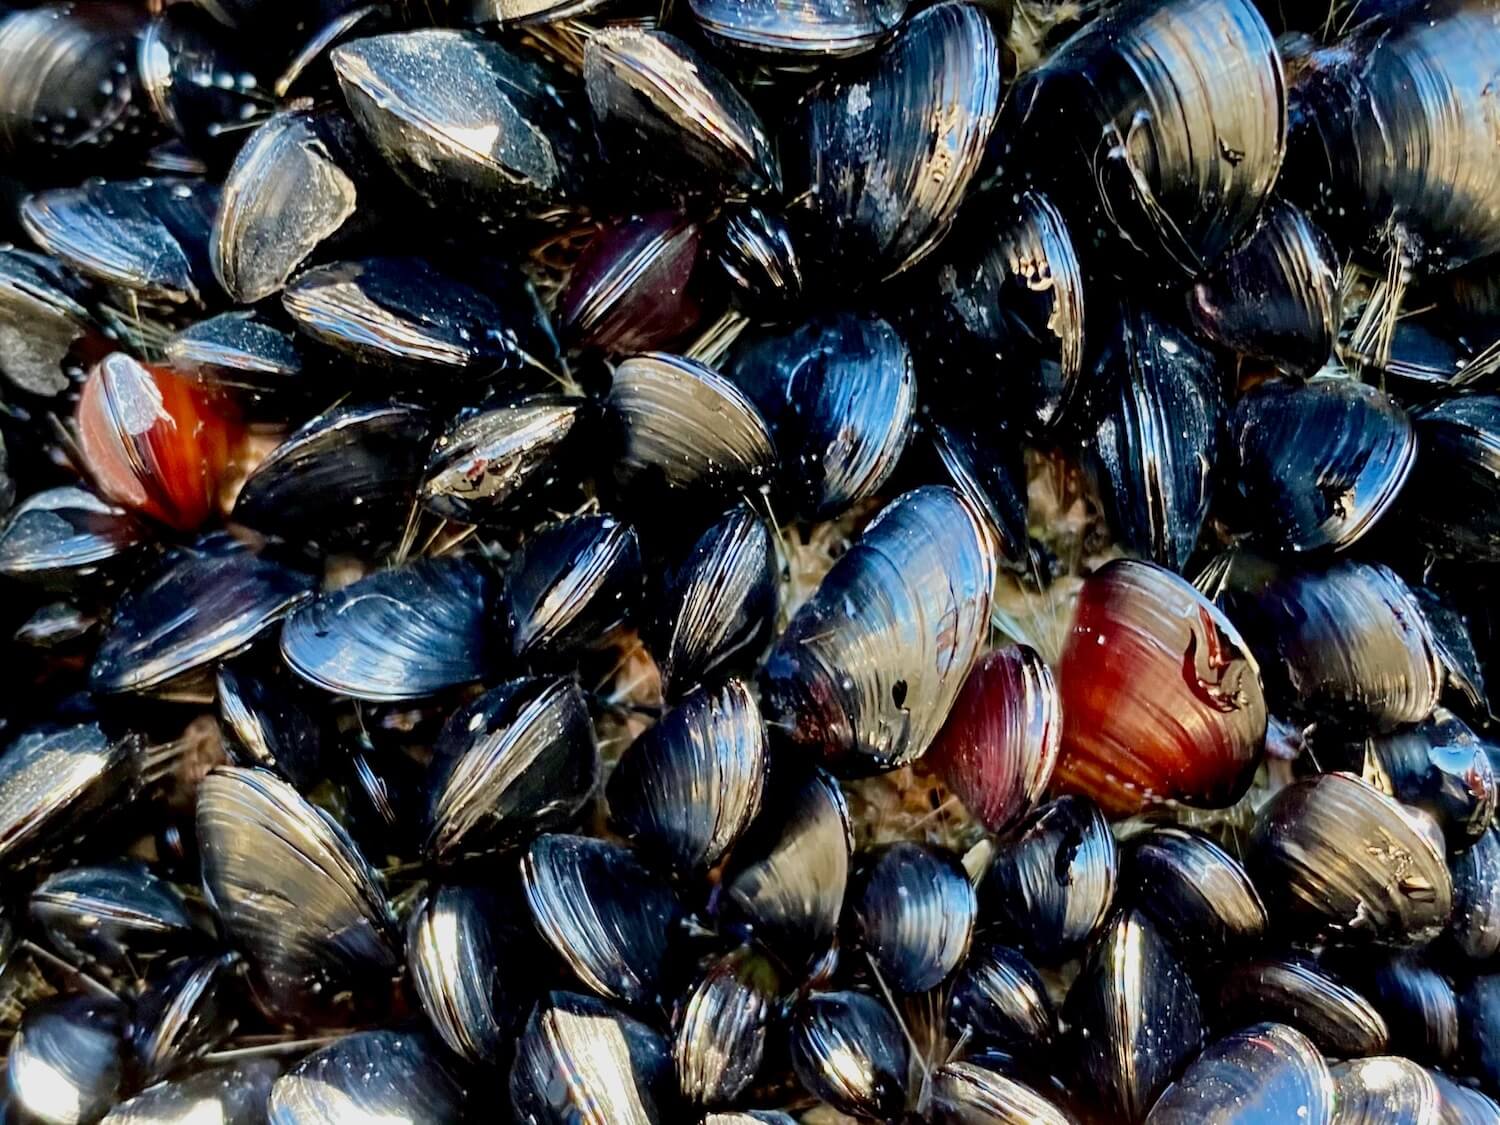 Black mussels with shiny texture around the shells cling to the rocks near Ruby Beach, on the Washignton Coast.